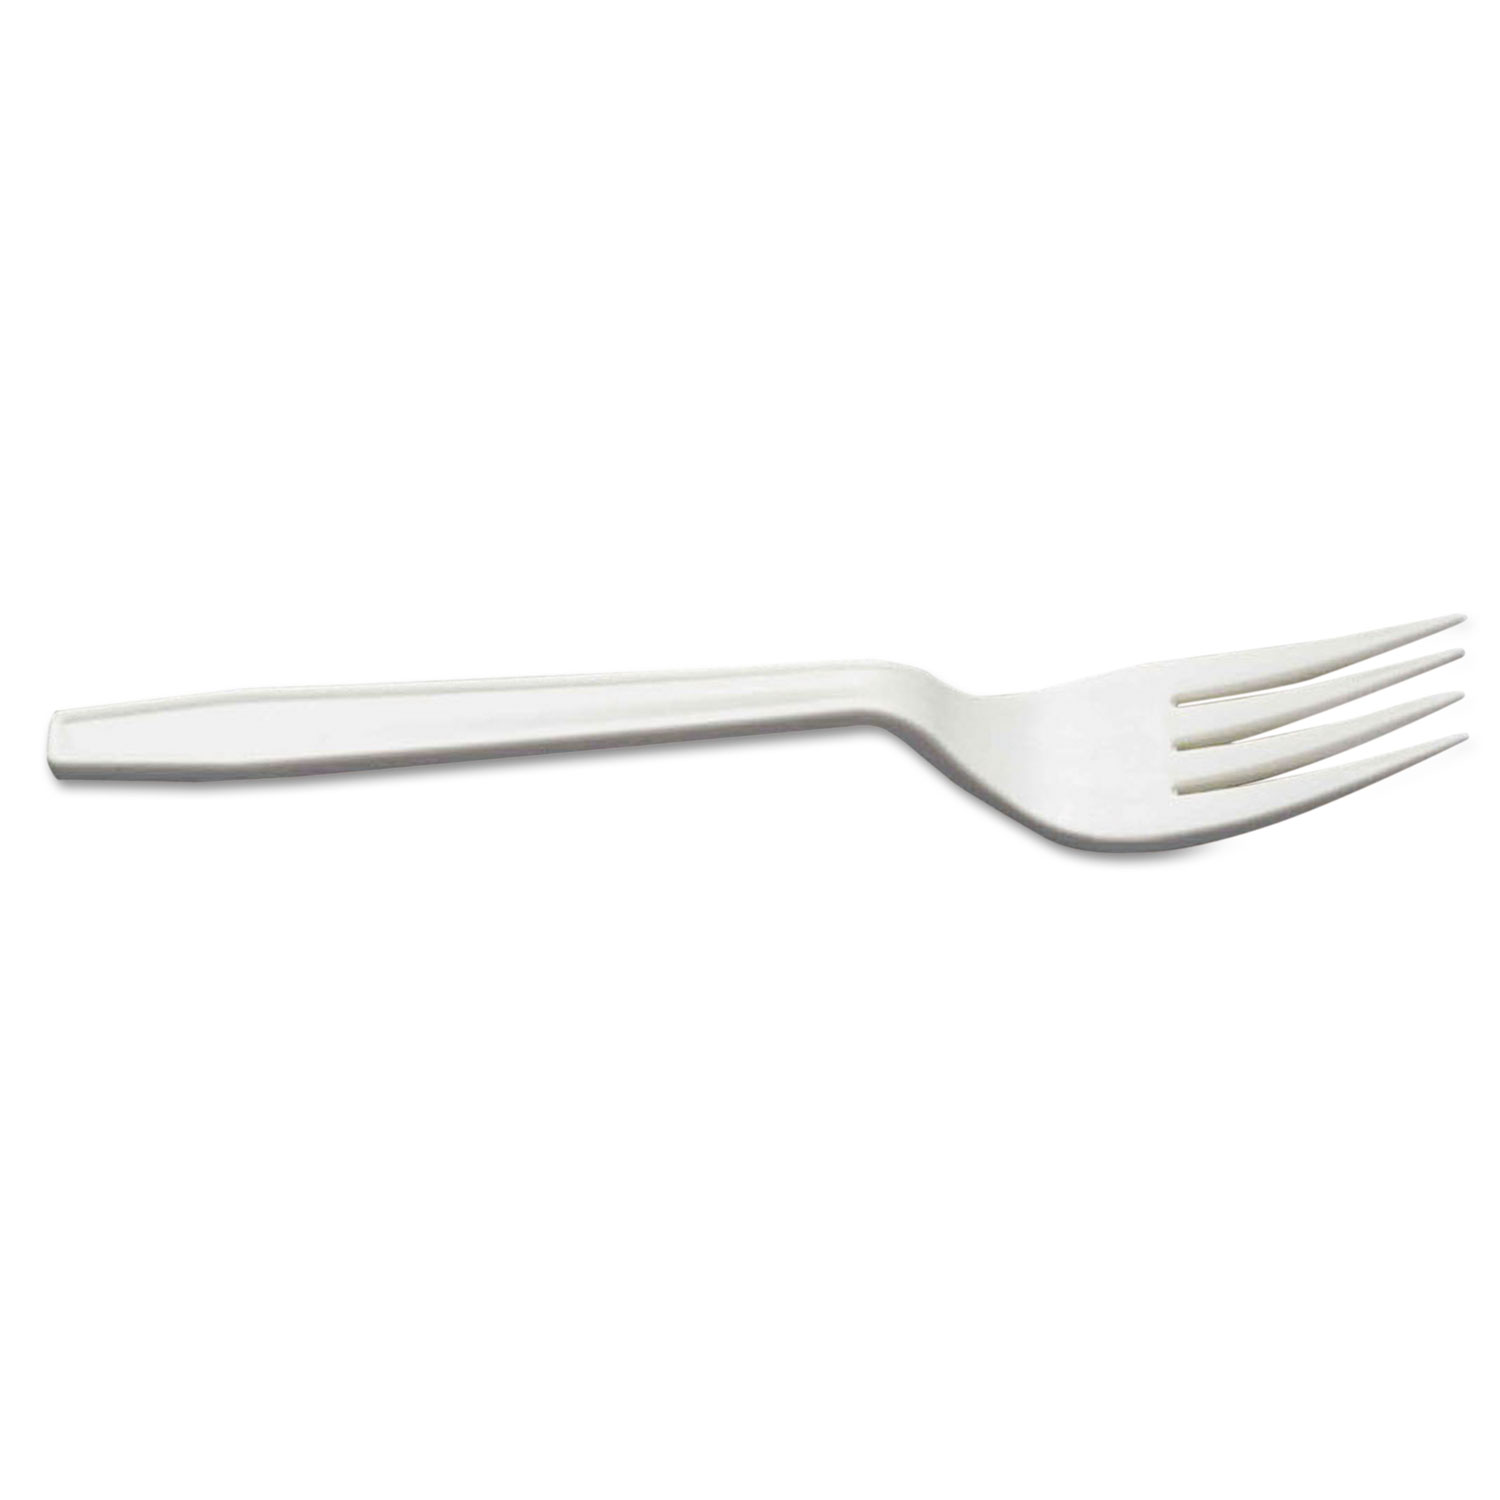  Genpak HSF01--- Harvest Pro Starch Disposable Fork, Natural Starches/Plastic, Tan, 6, 1000/CT (GNPHSF01) 